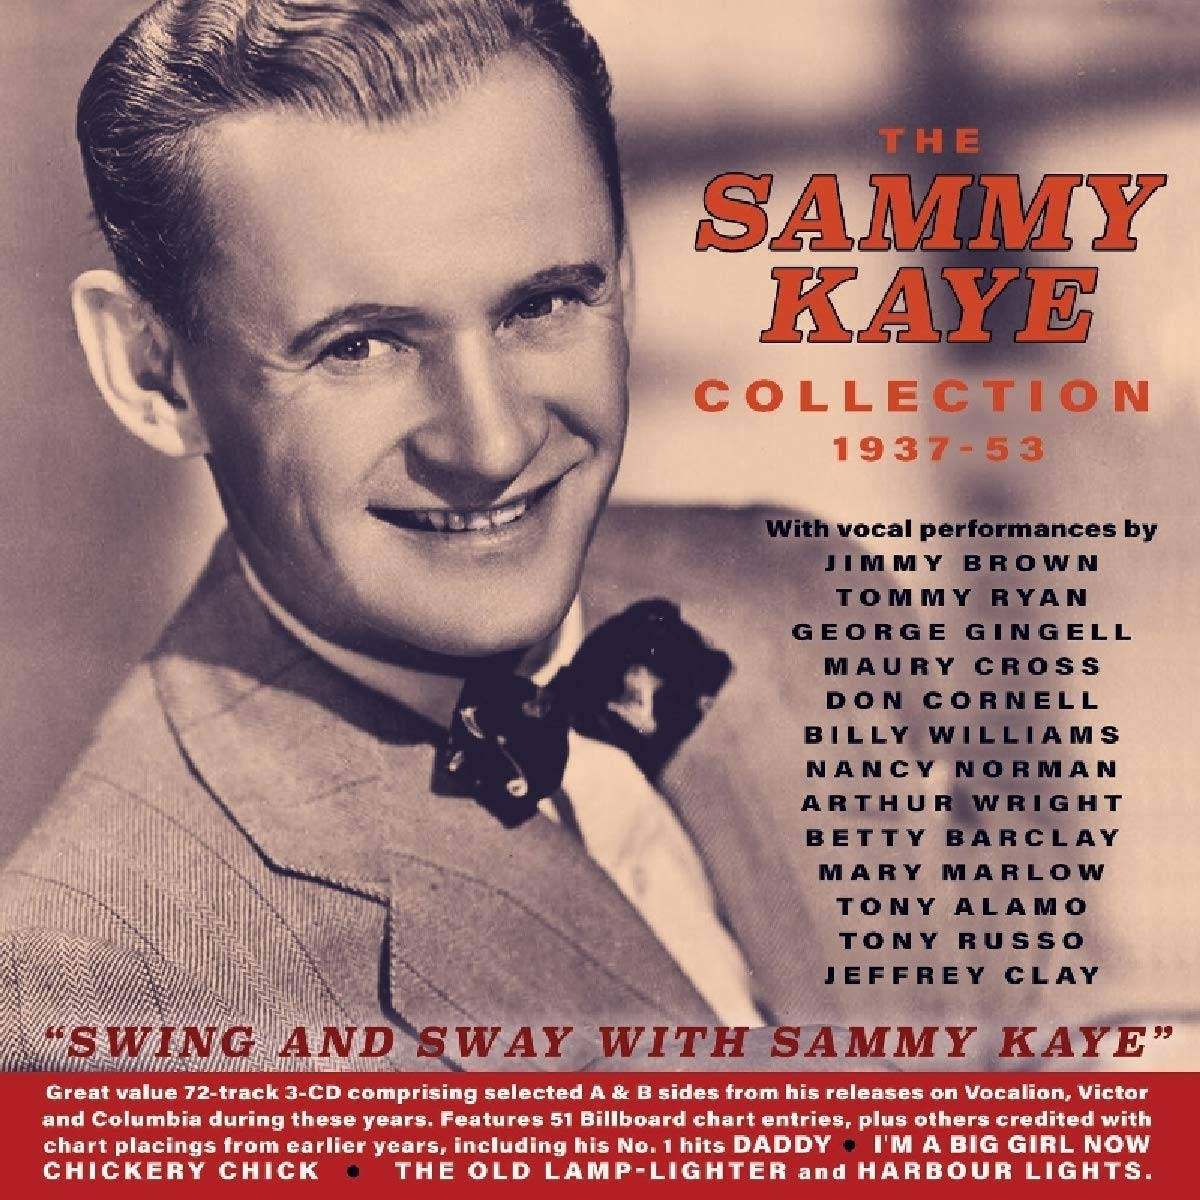 Sammy Kaye Collection Cover Wallpaper